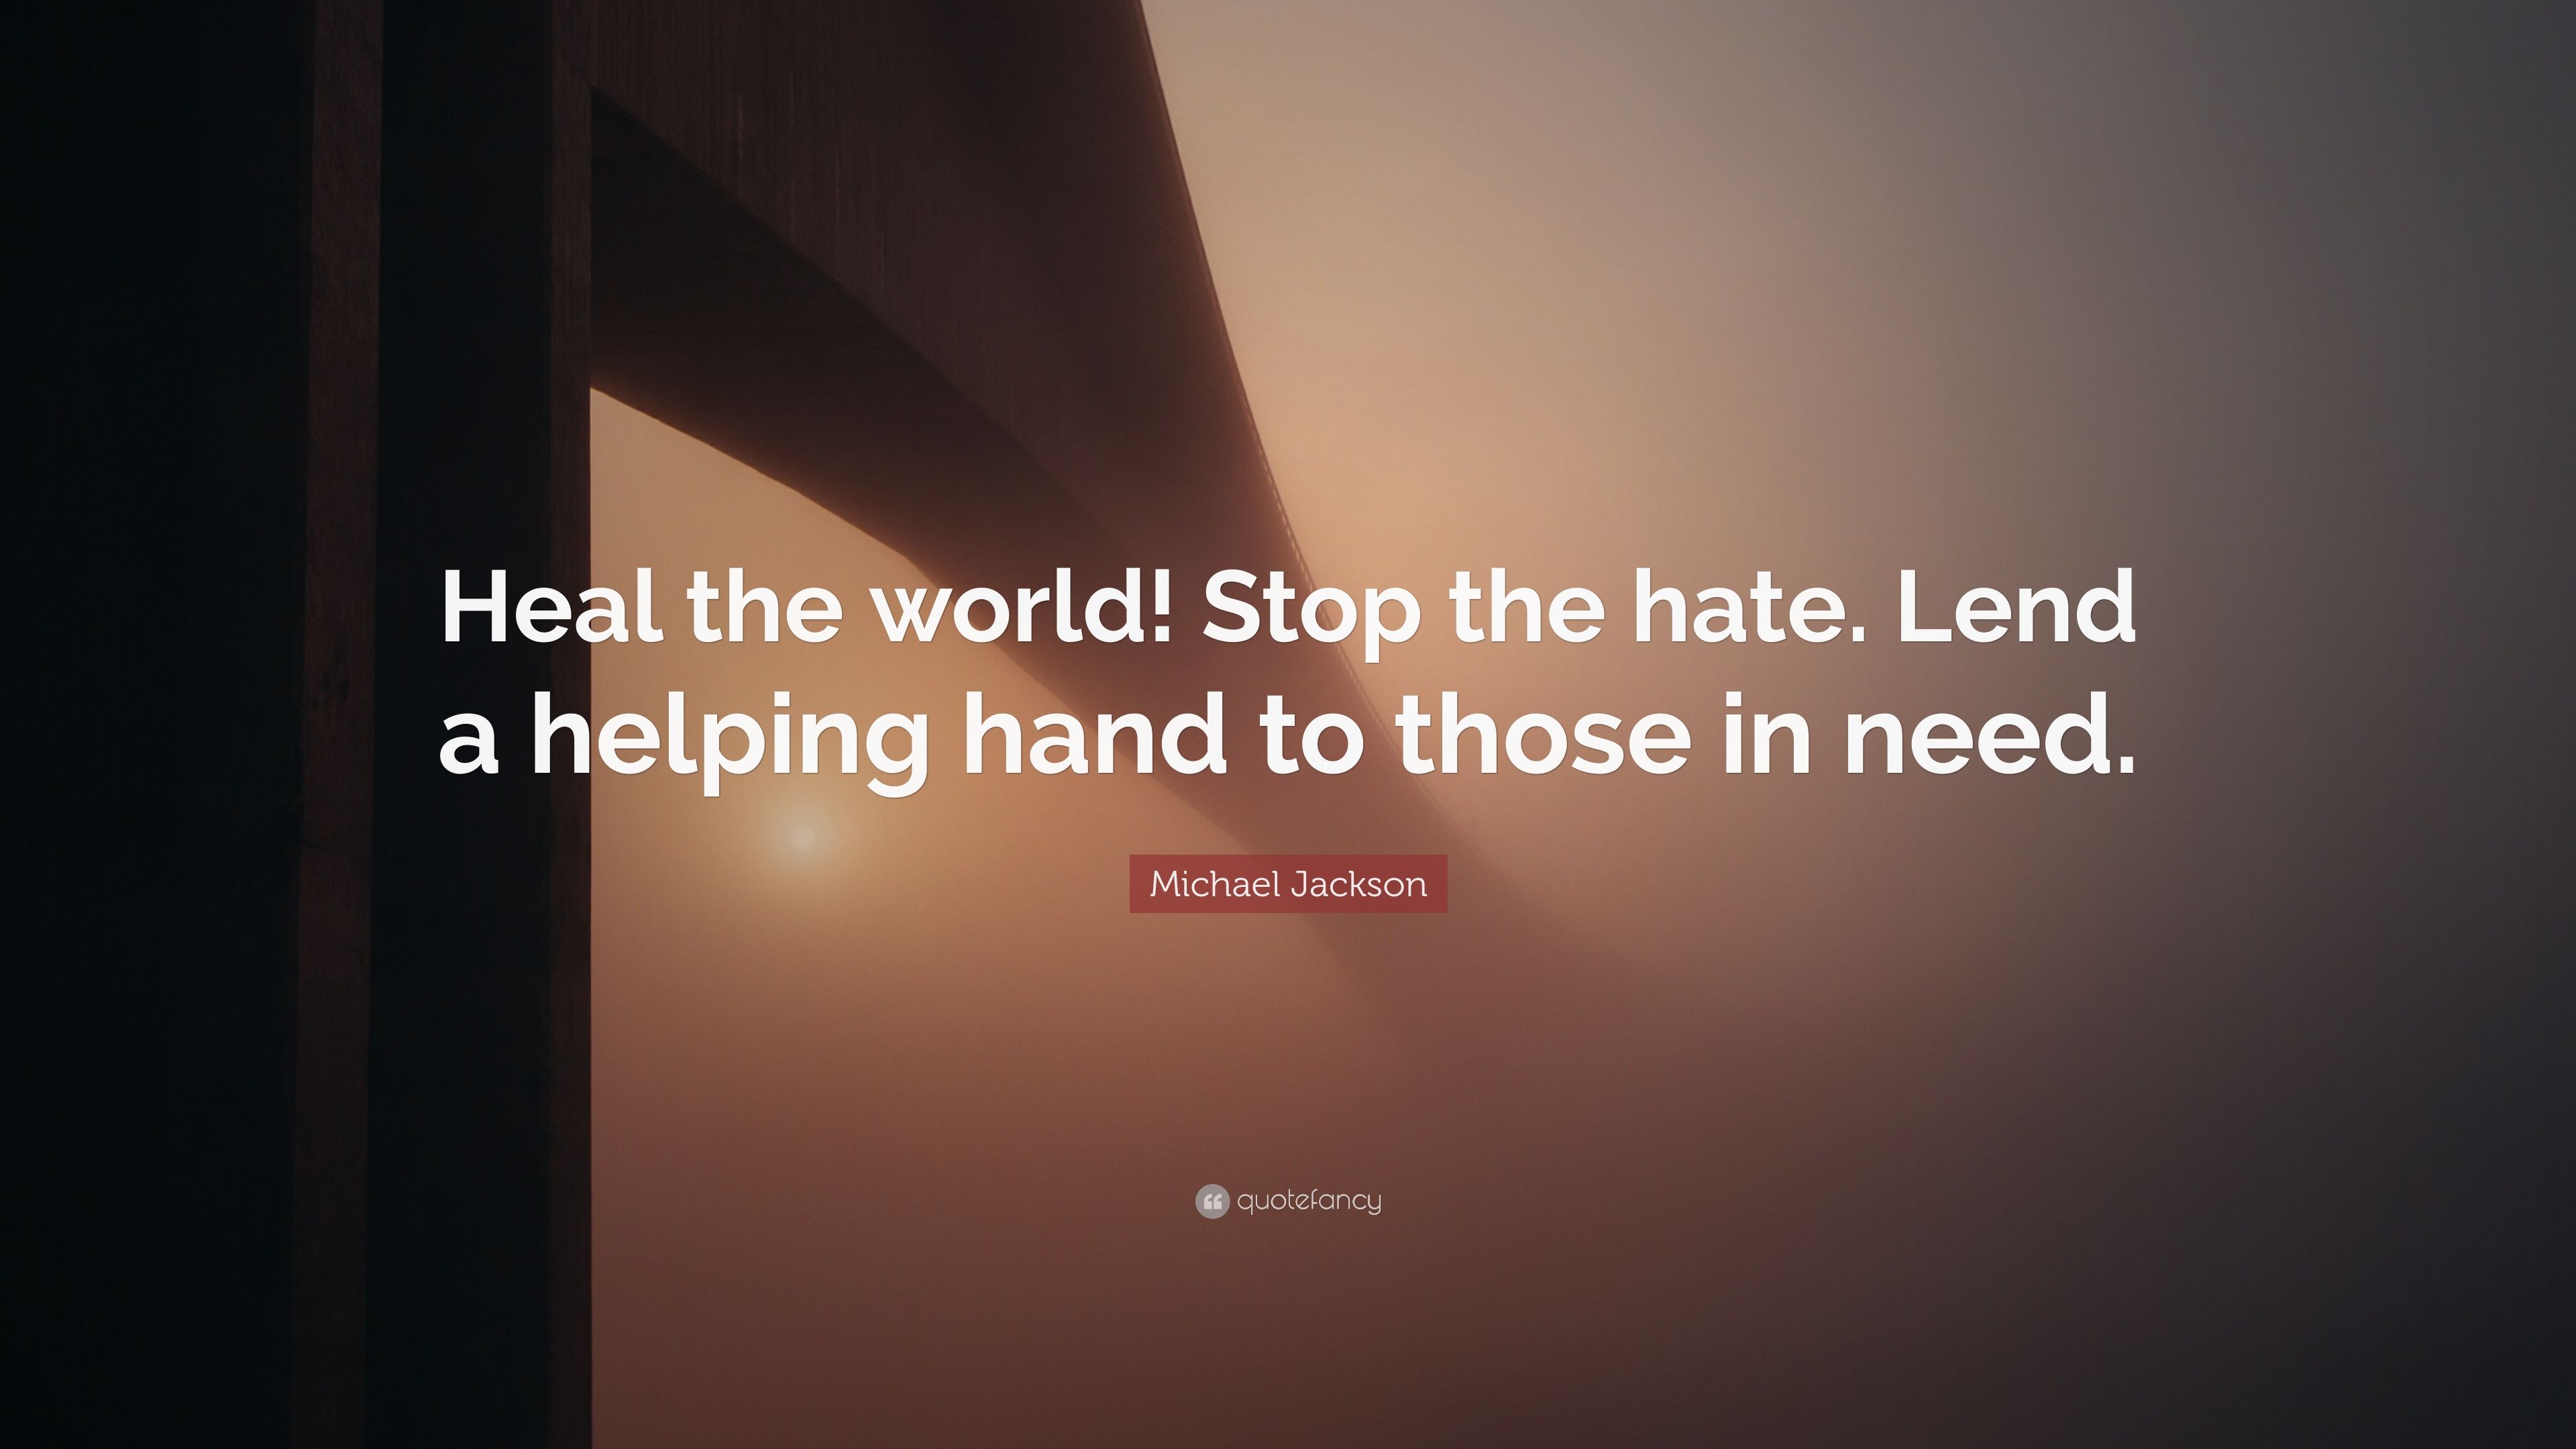 Michael Jackson Quote: “Heal the world! Stop the hate. Lend a